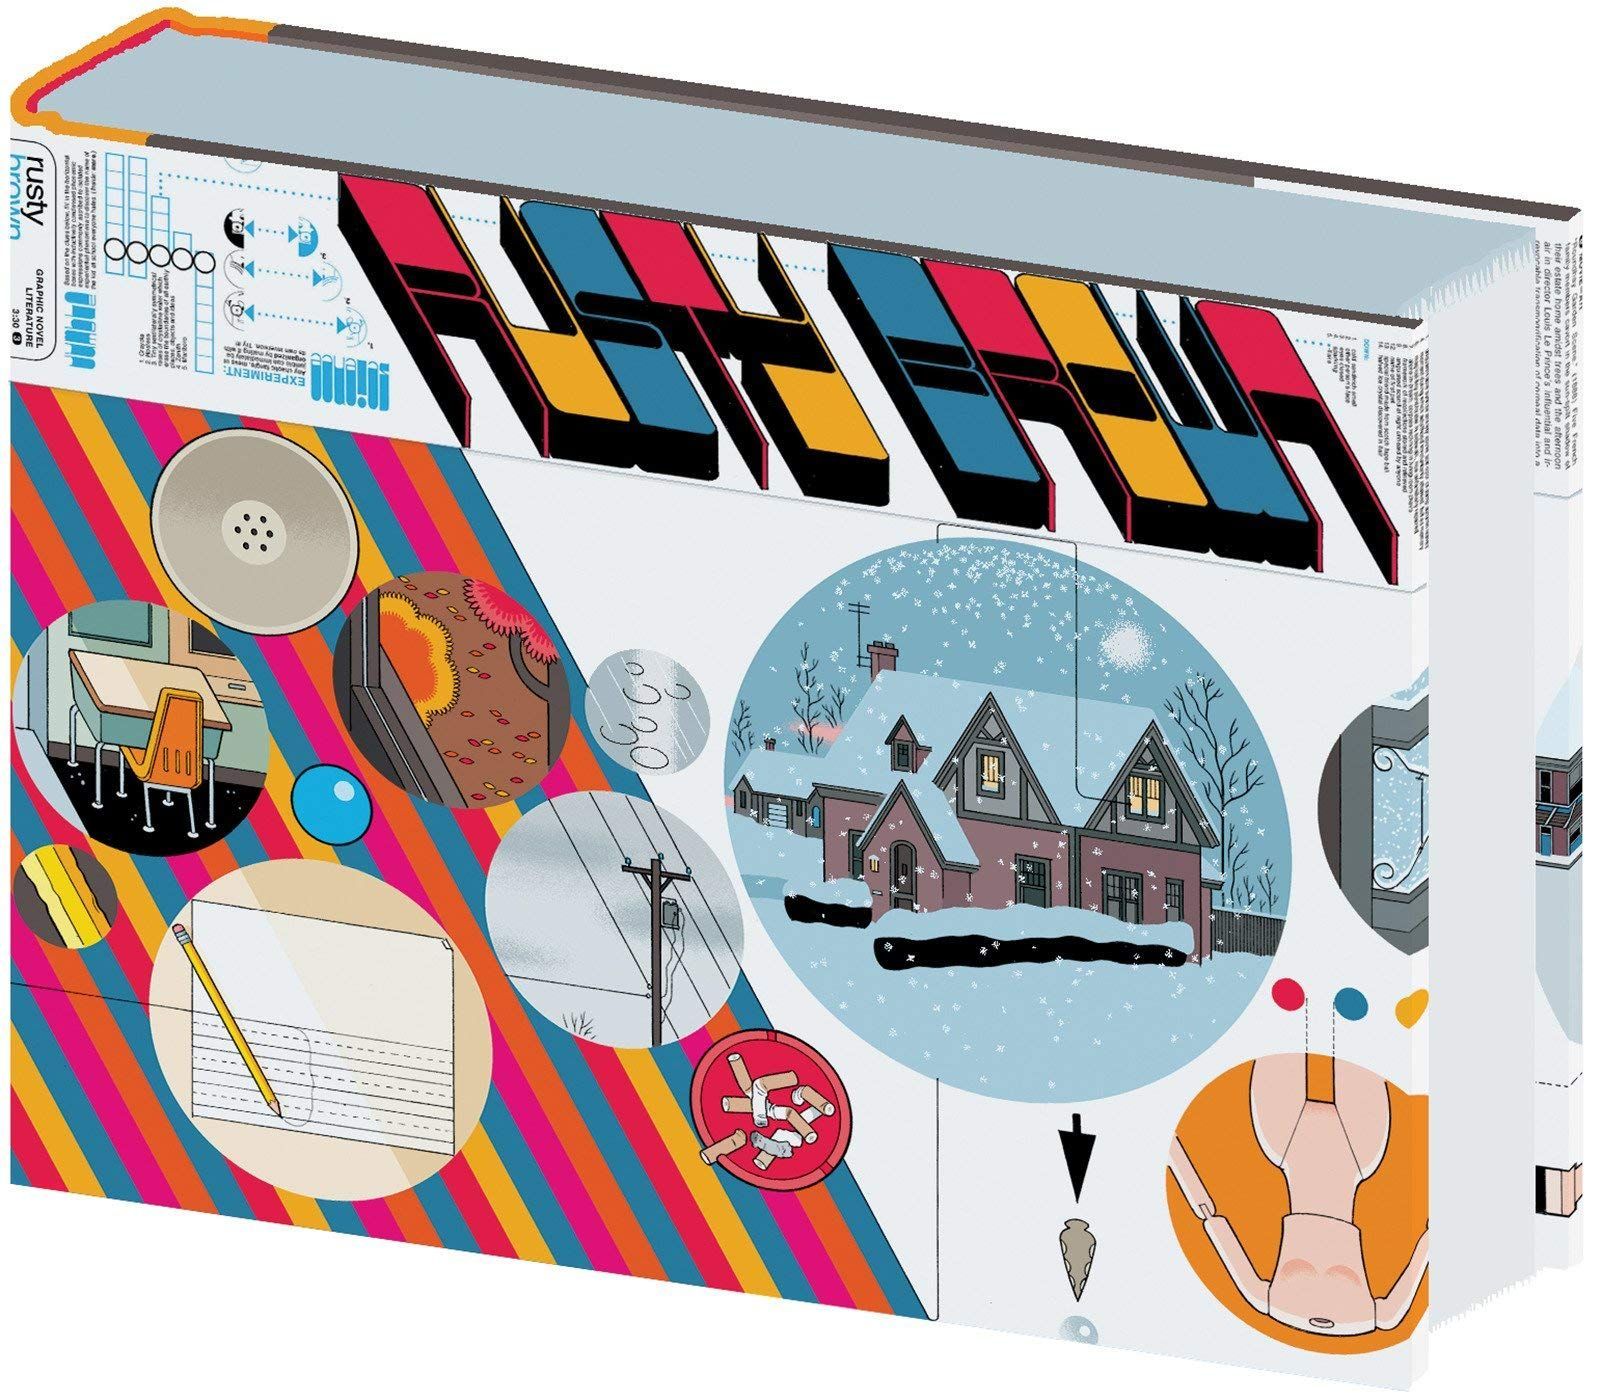 Does Chris Ware Still Hate Fun?